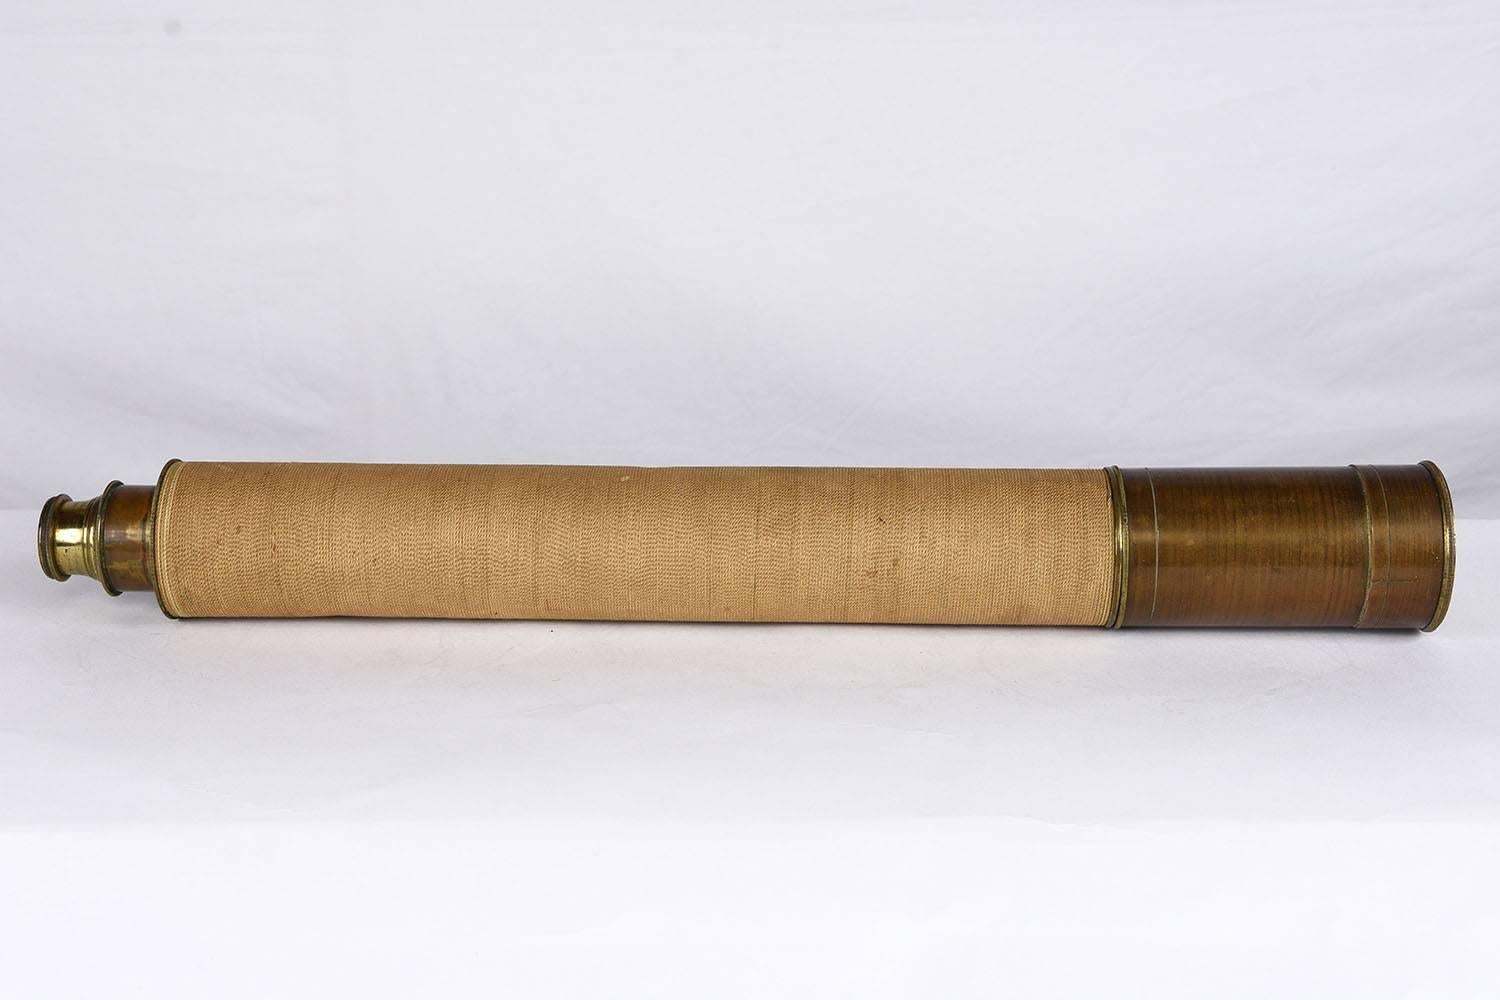 This 1950s vintage Mid-Century Modern nautical spyglass or telescope features a brass tube that has been wrapped in a textile. The spyglass is in working condition with glass lenses. This spyglass is solid, intriguing and ready to be used for years